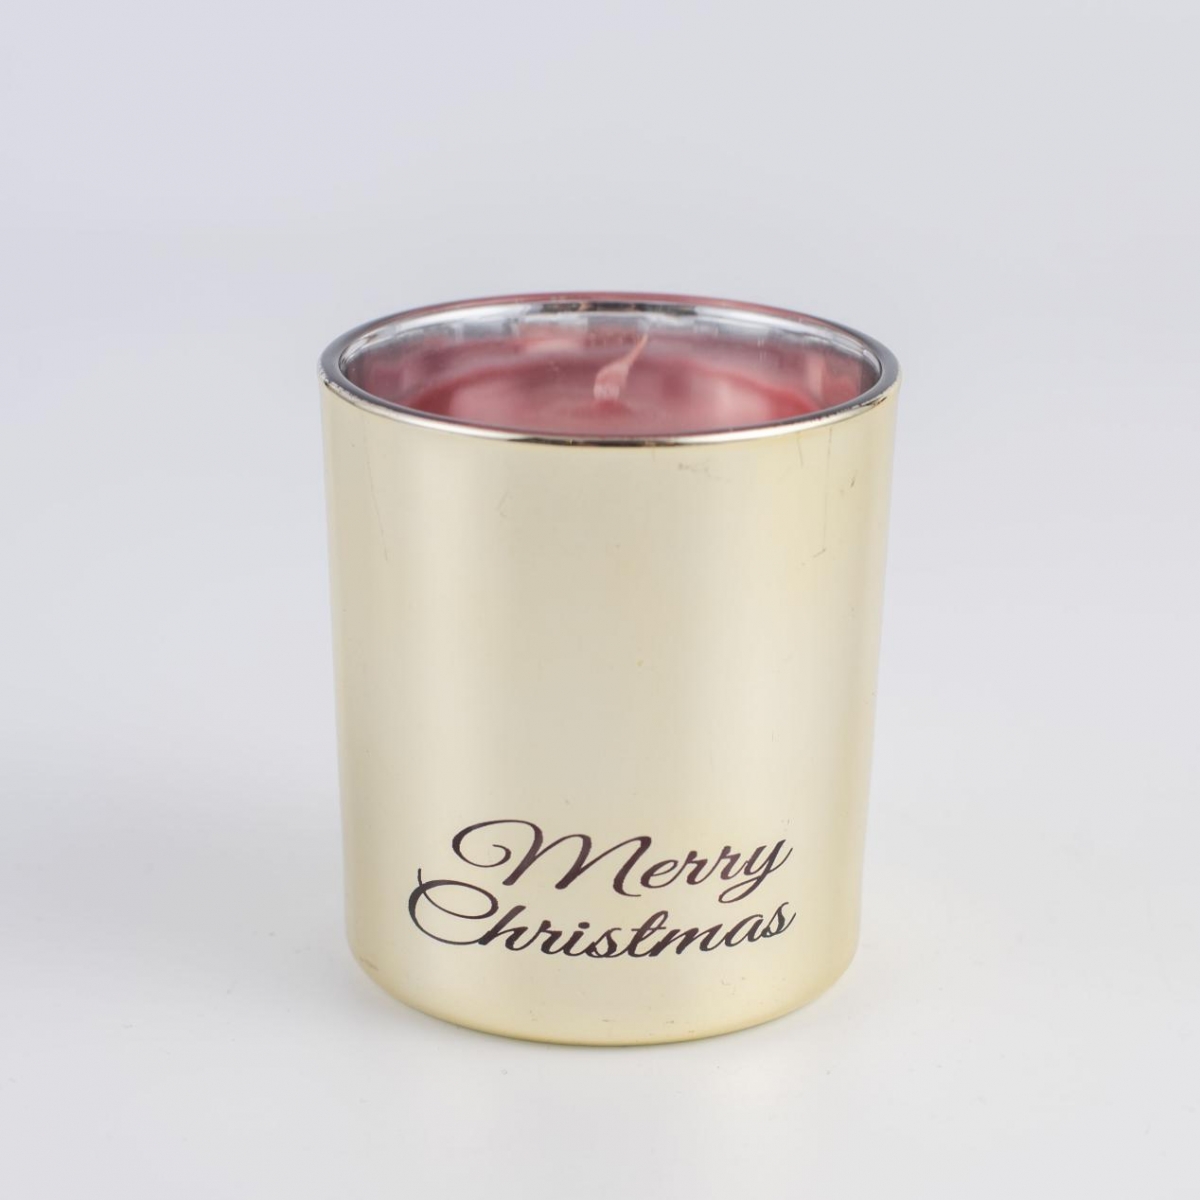 Scented Candles – Natural Essential Oils ,Beeswax Candles , Christmas Candles ,China Factory ,Price-HOWCANDLE-Candles,Scented Candles,Aromatherapy Candles,Soy Candles,Vegan Candles,Jar Candles,Pillar Candles,Candle Gift Sets,Essential Oils,Reed Diffuser,Candle Holder,